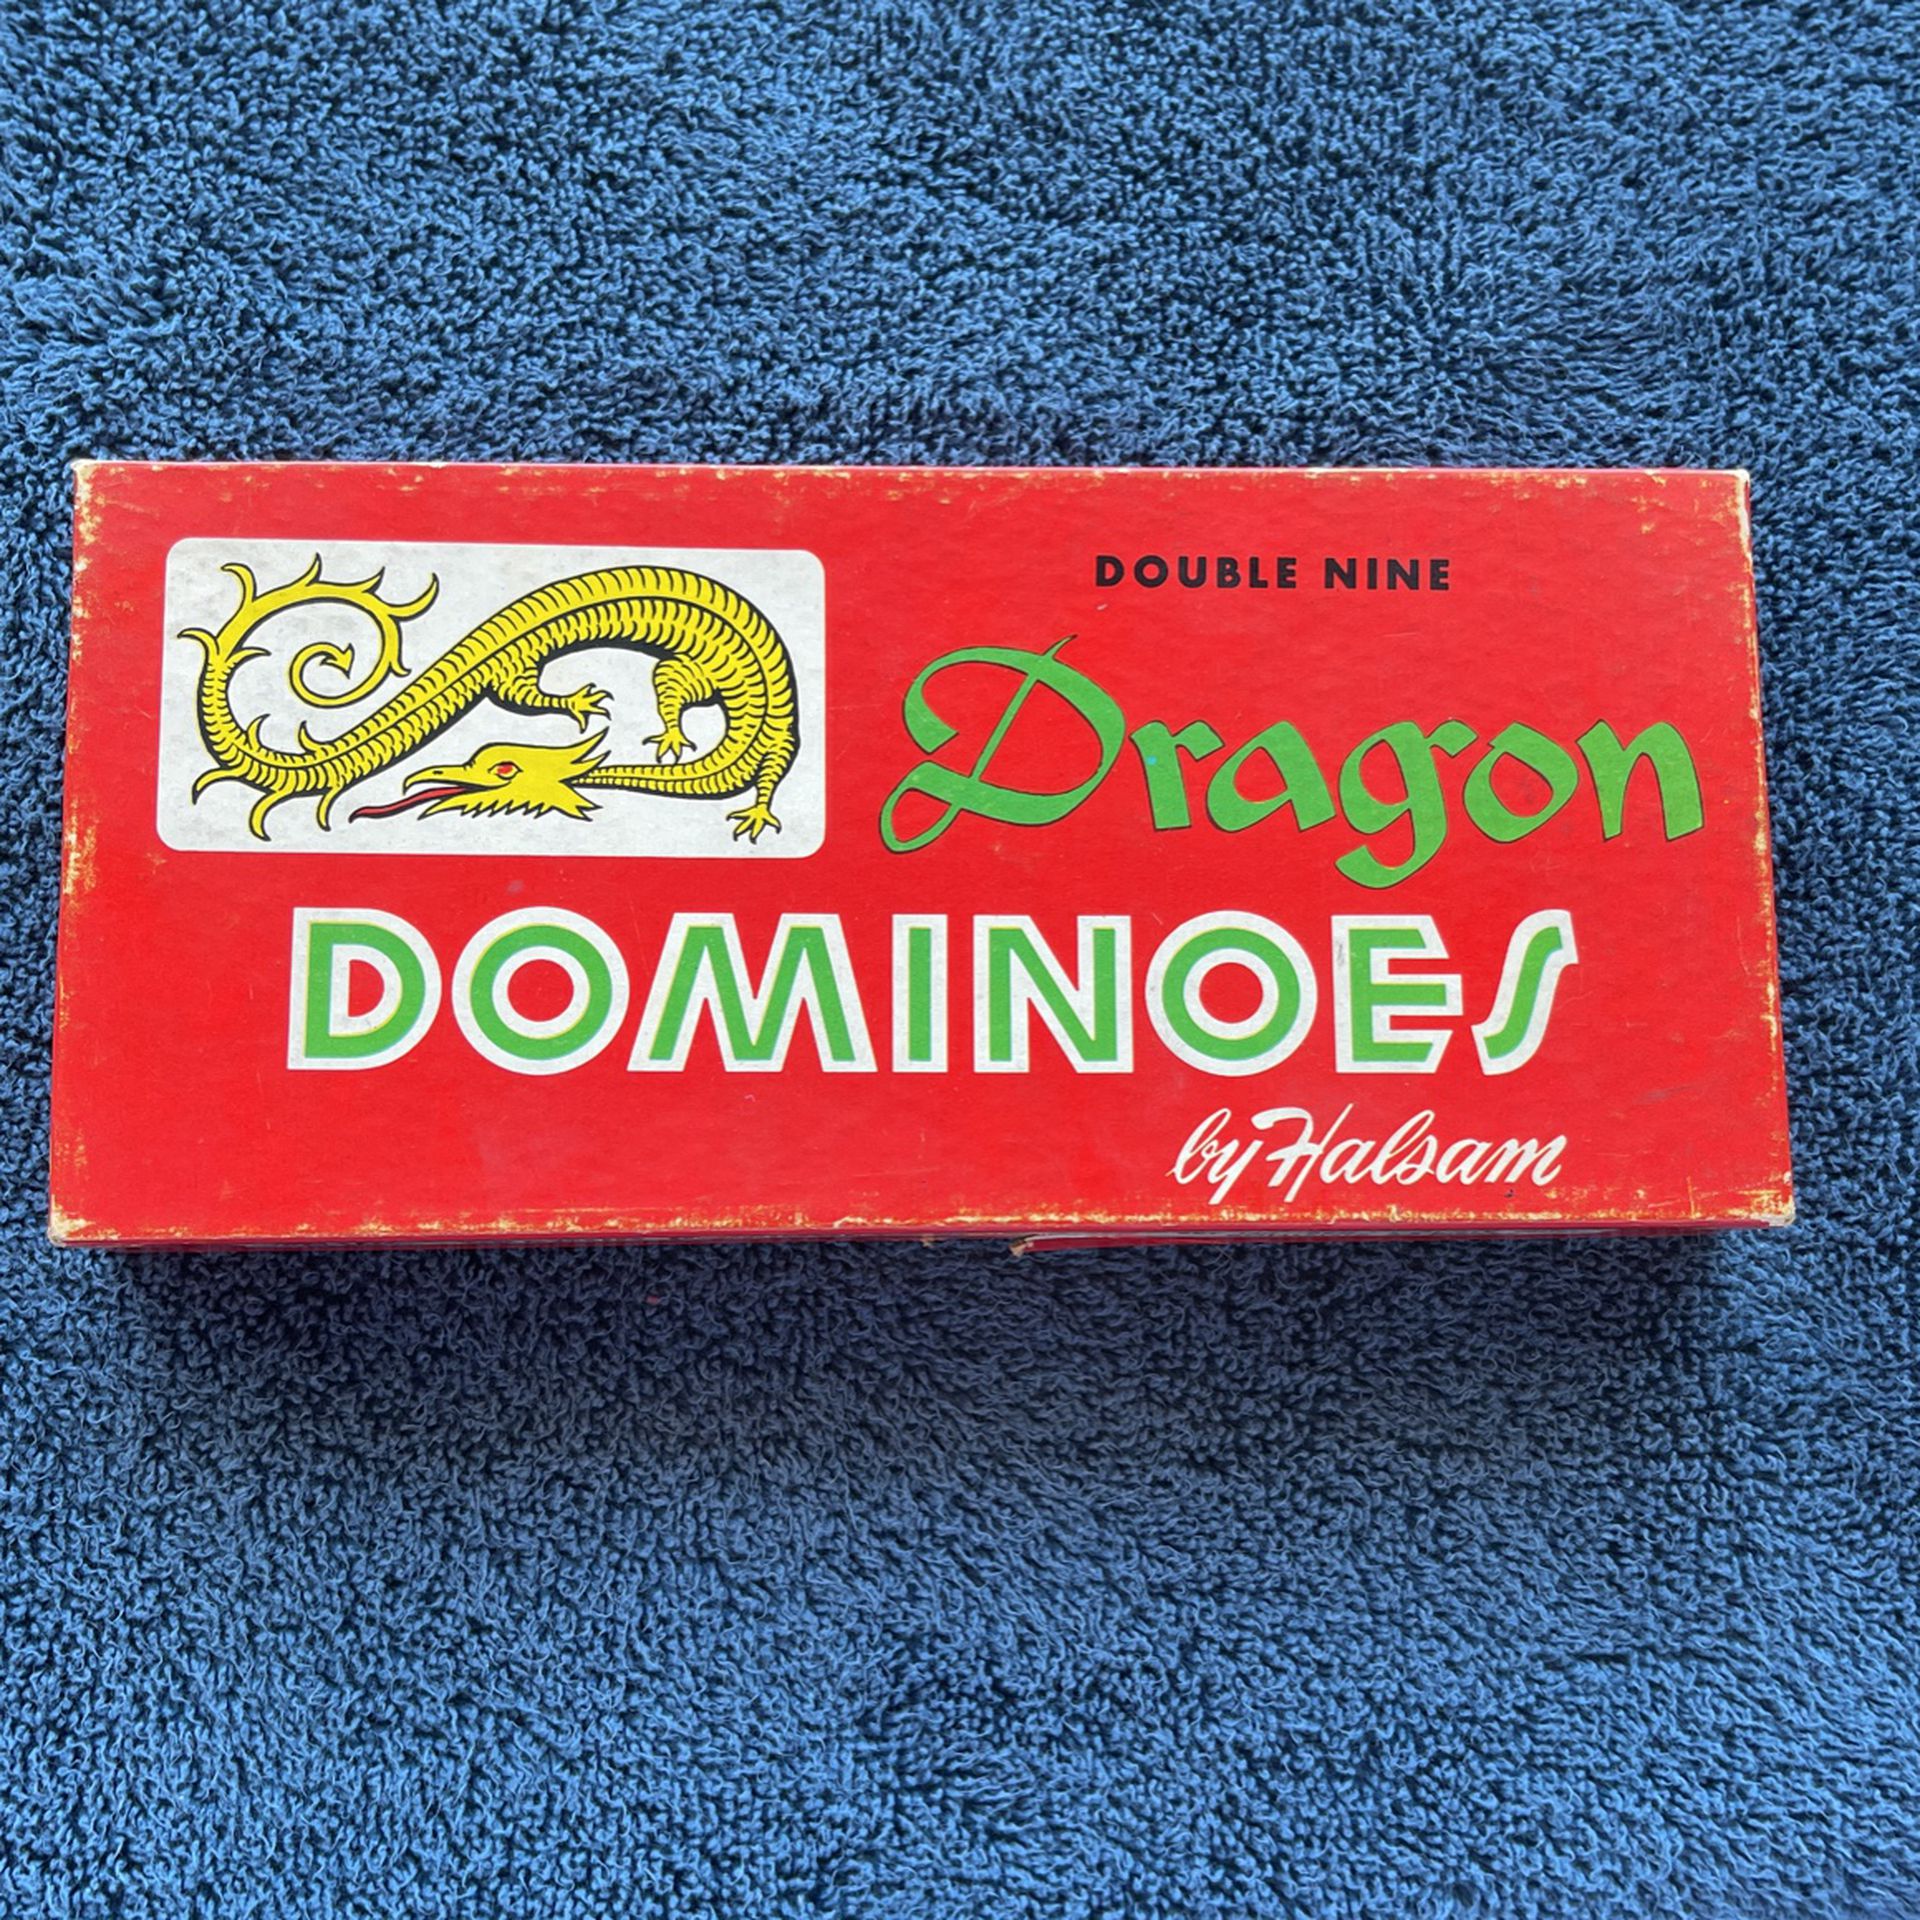 Double Nine Vintage Dragon Dominoes By halsam 